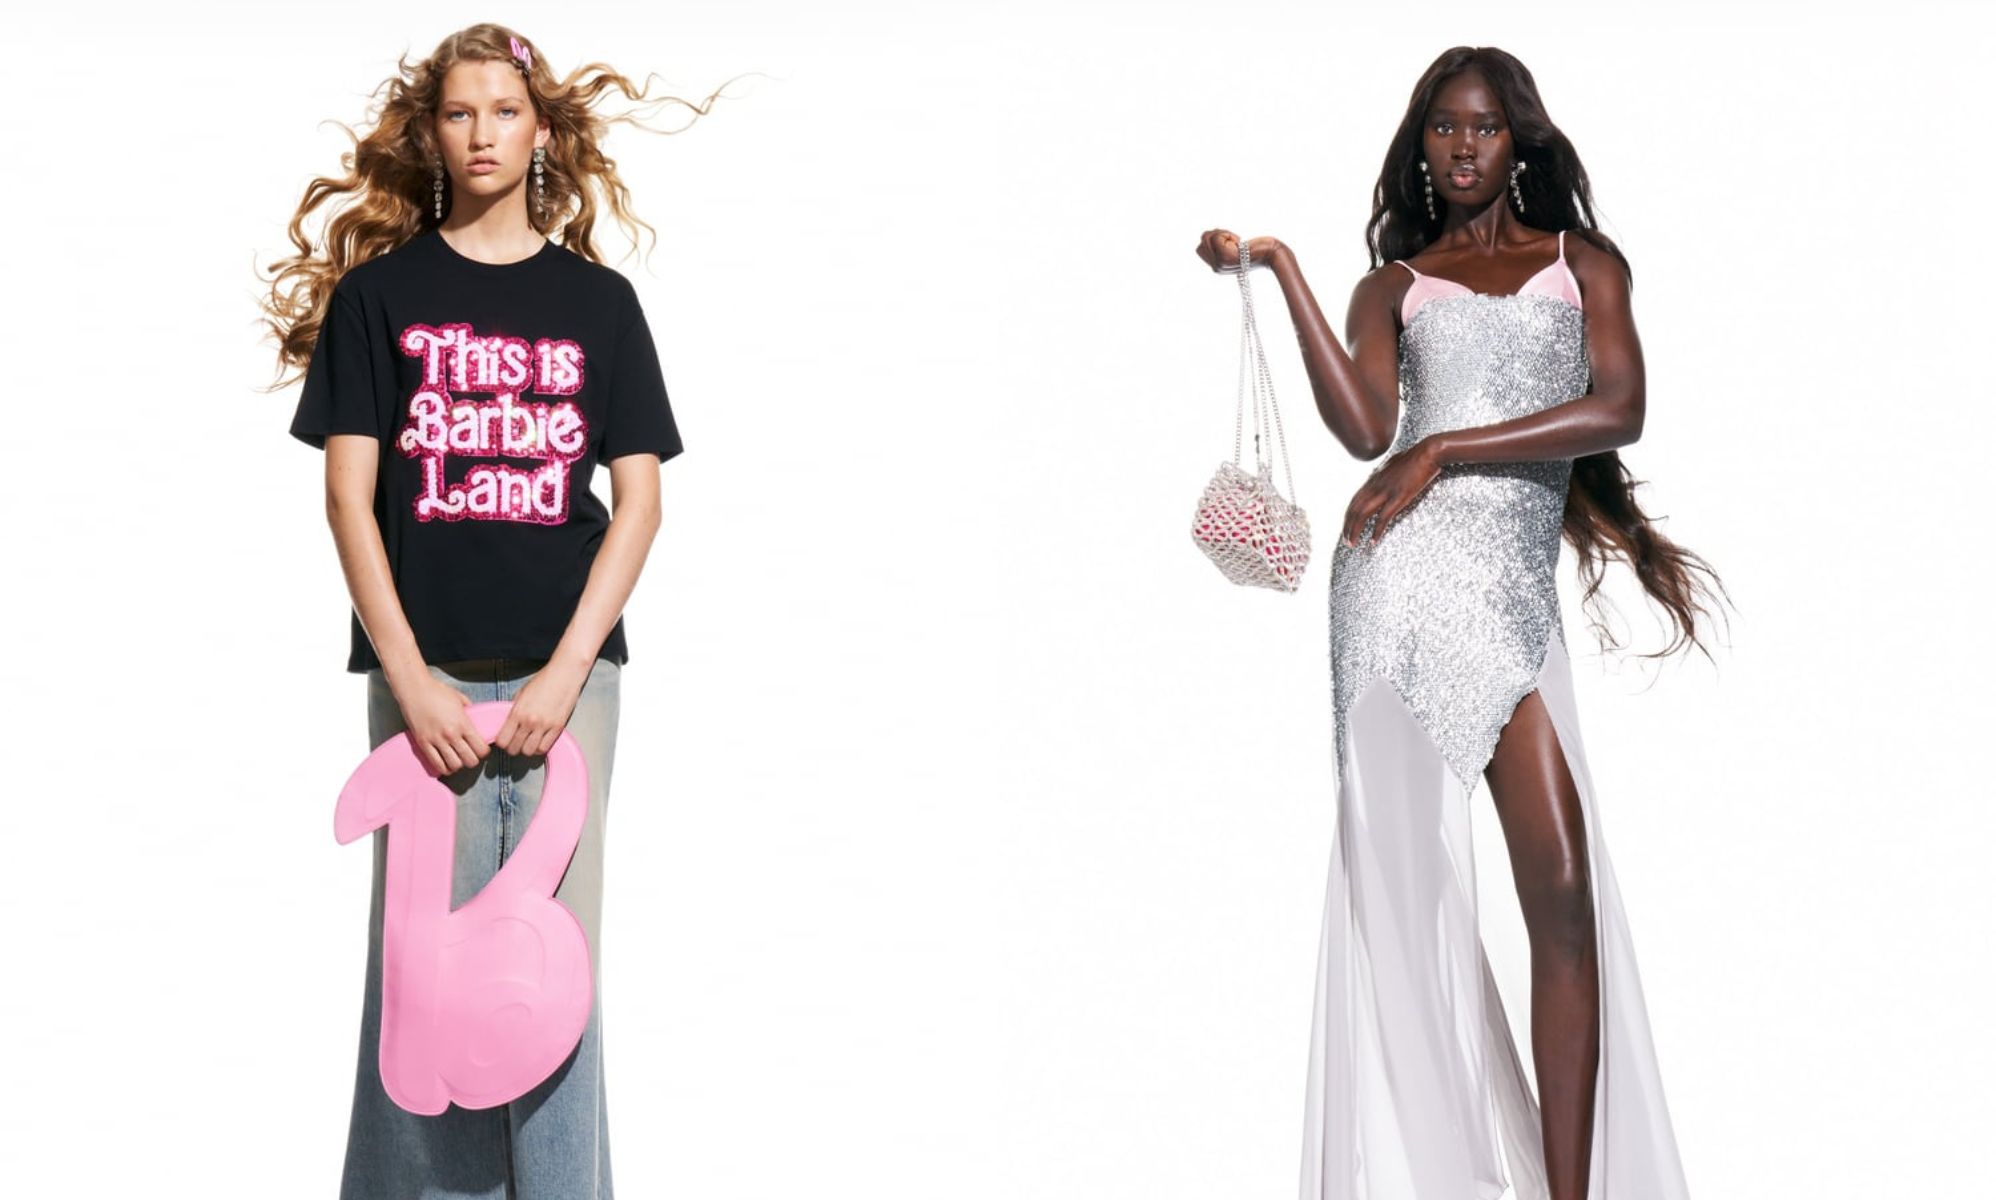 Zara x Barbie collection is one of the best collabs yet